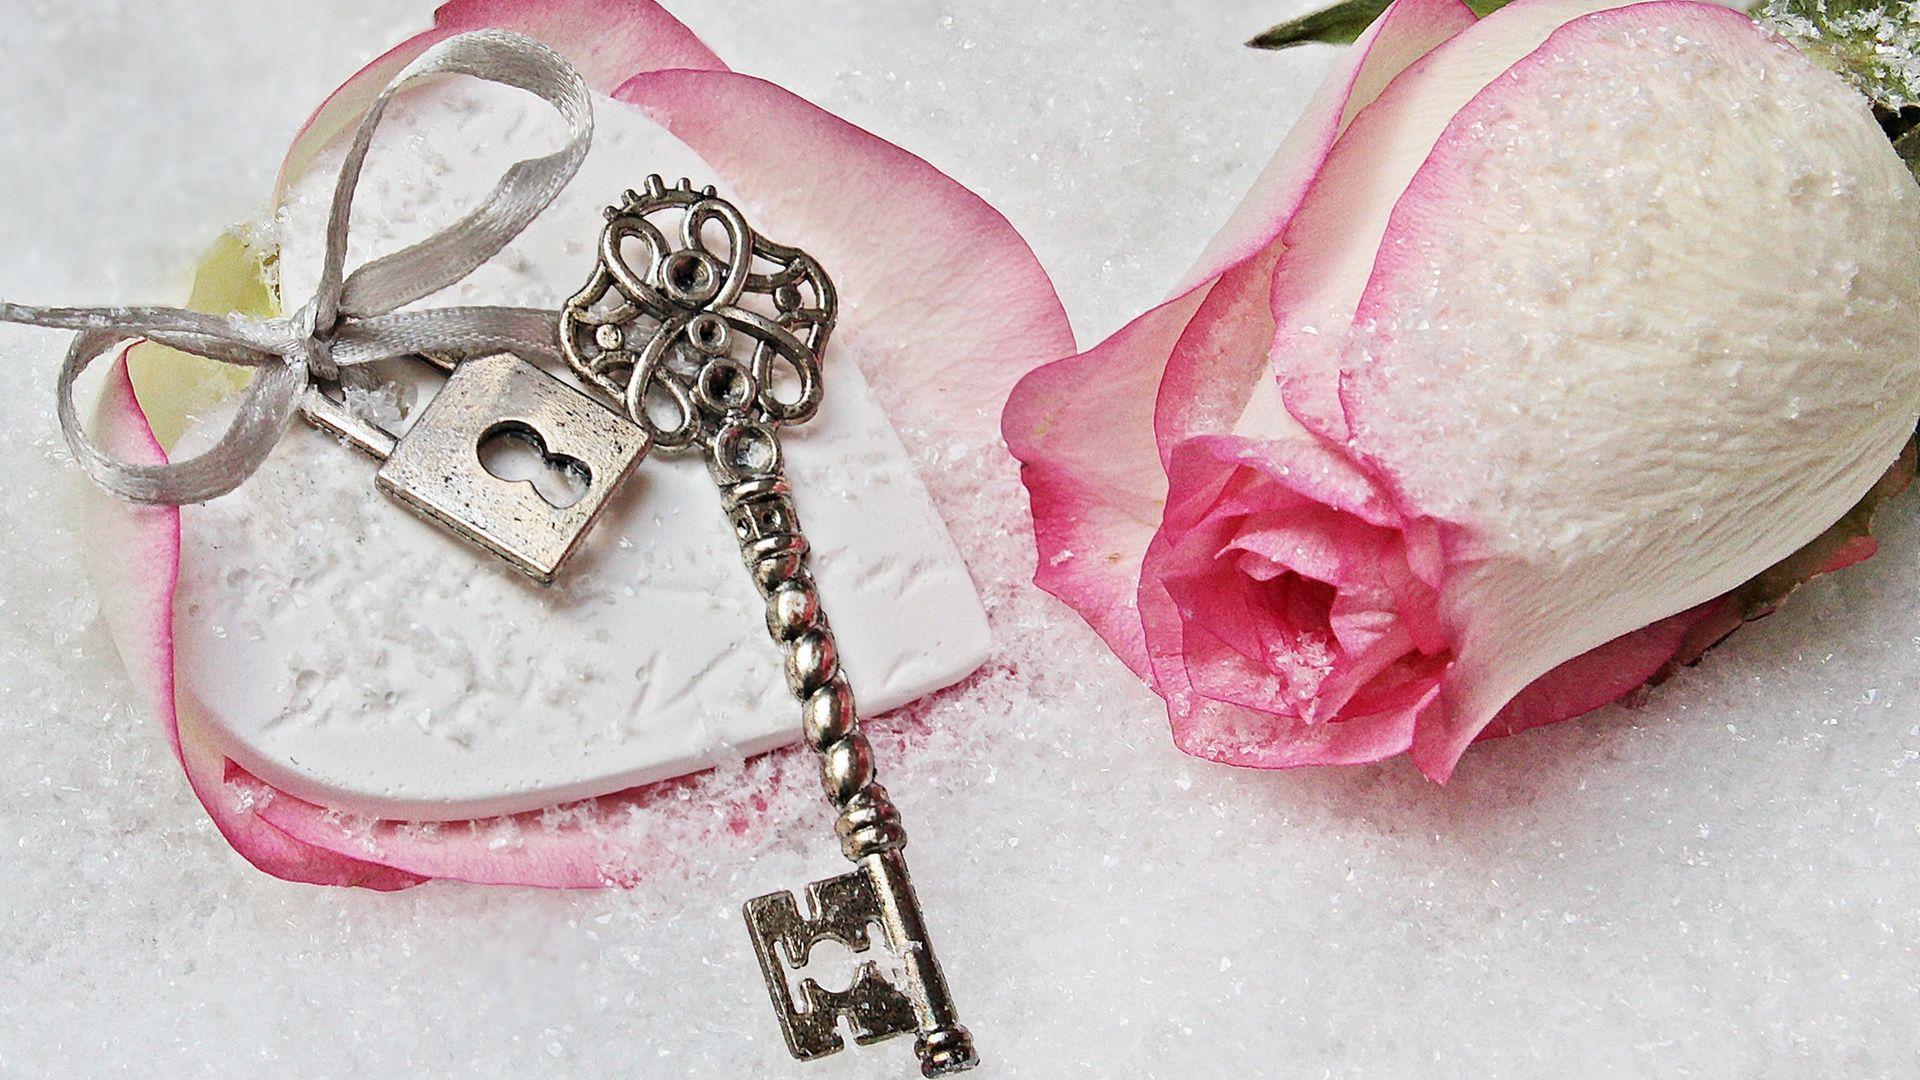 Rose with Heart Lock and key Wallpaper